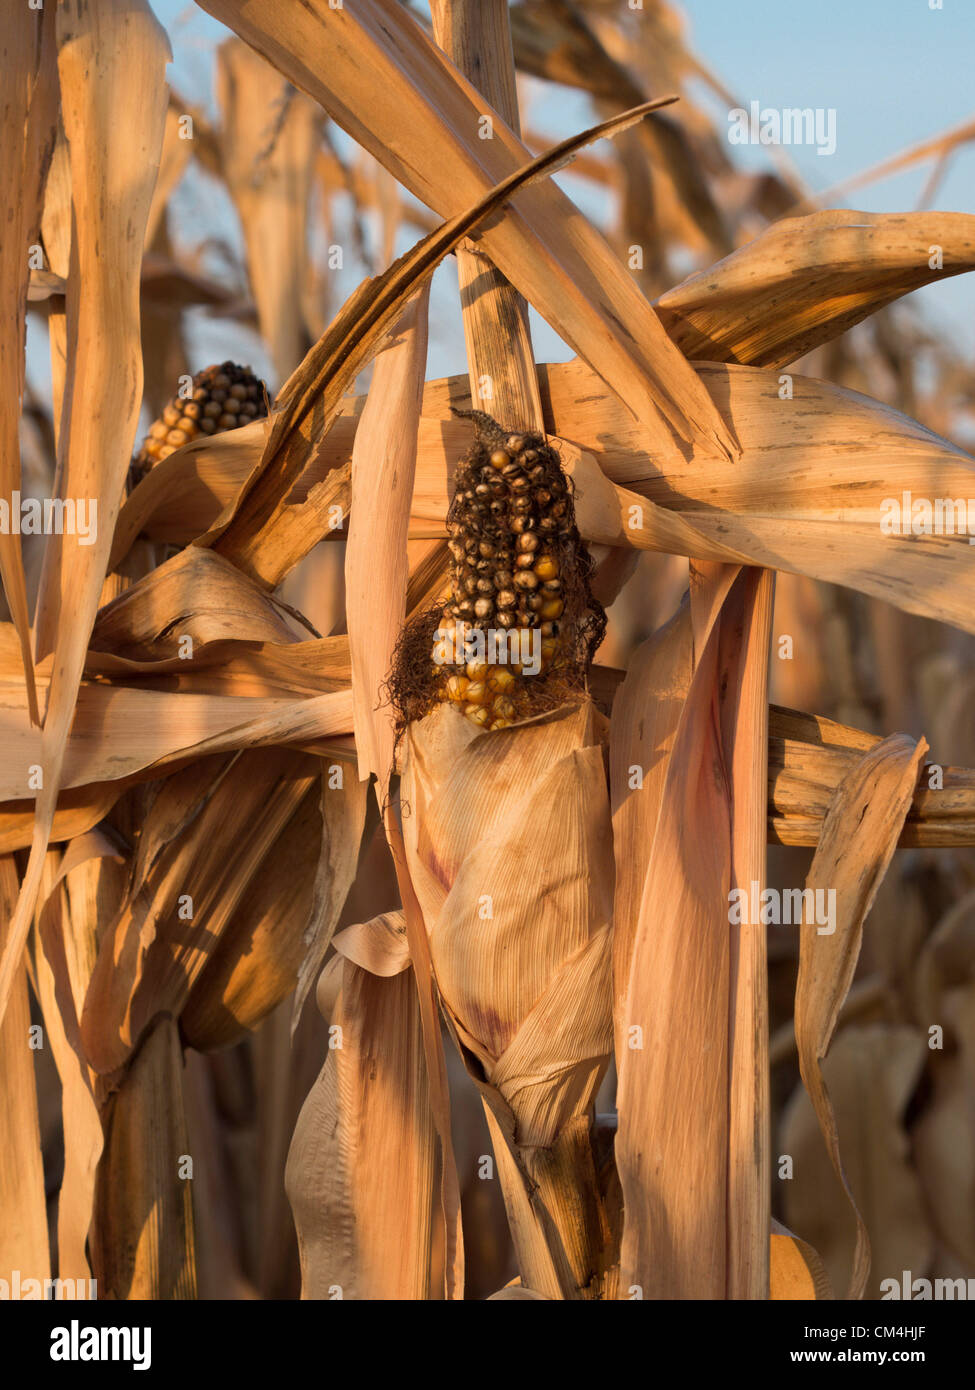 Sep. 28, 2012 - Northfield, Minnesota, U.S. - Stunted corn in a field waiting harvest. By chance, Northfield has received rain while areas only a few hours south are suffering record droughts (Credit Image: © David I. Gross/ZUMAPRESS.com) Stock Photo